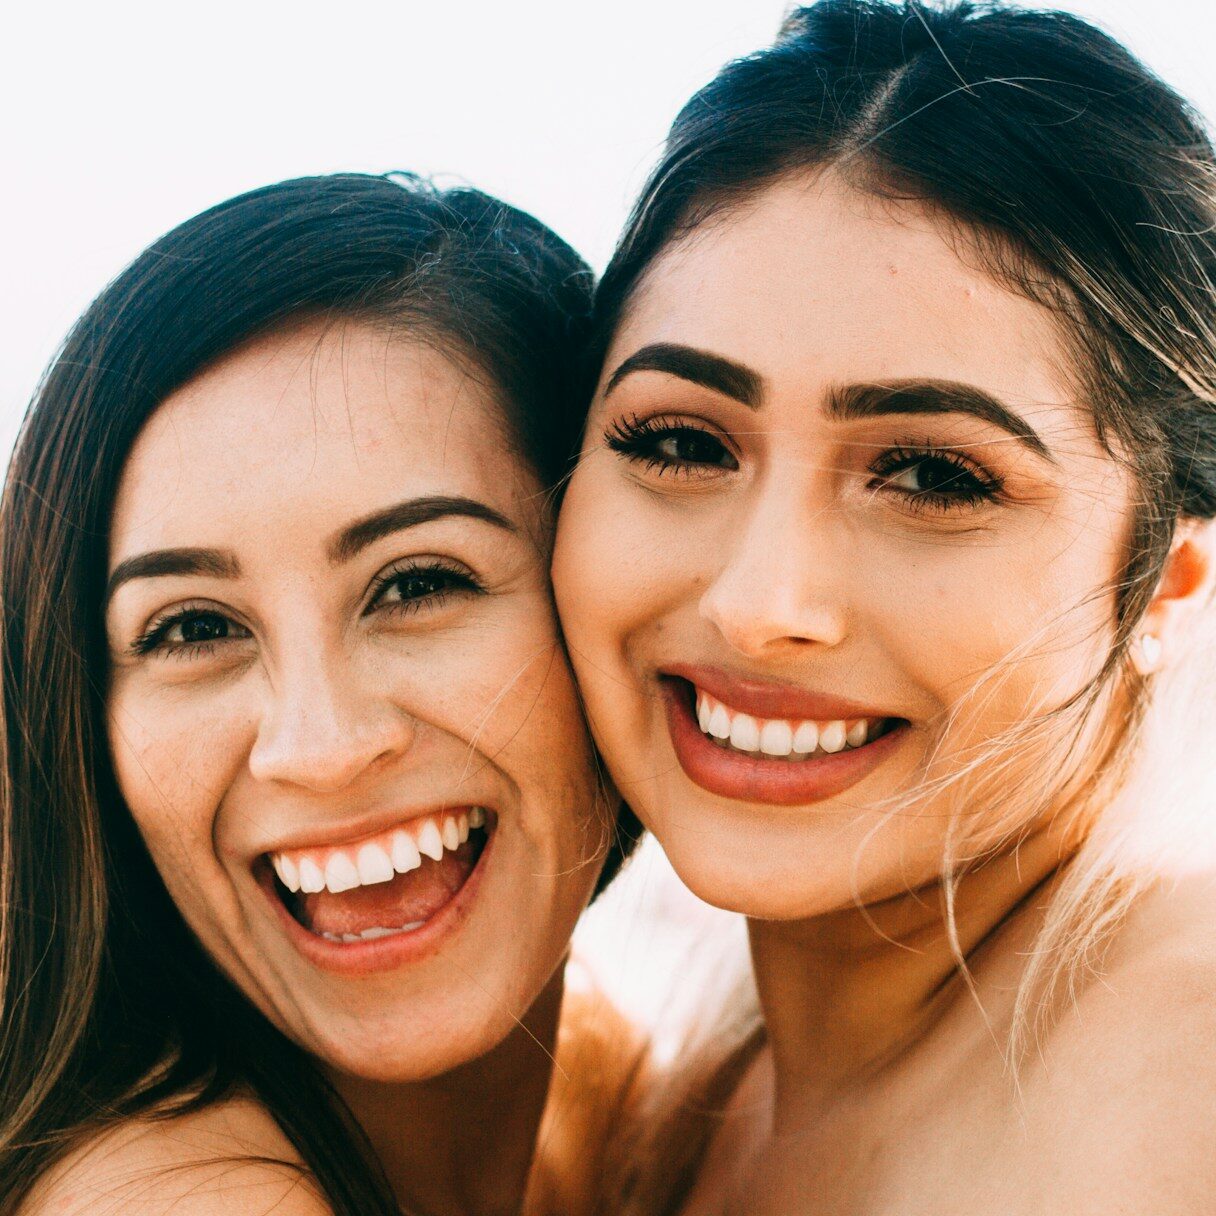 Smiling women with great teeth